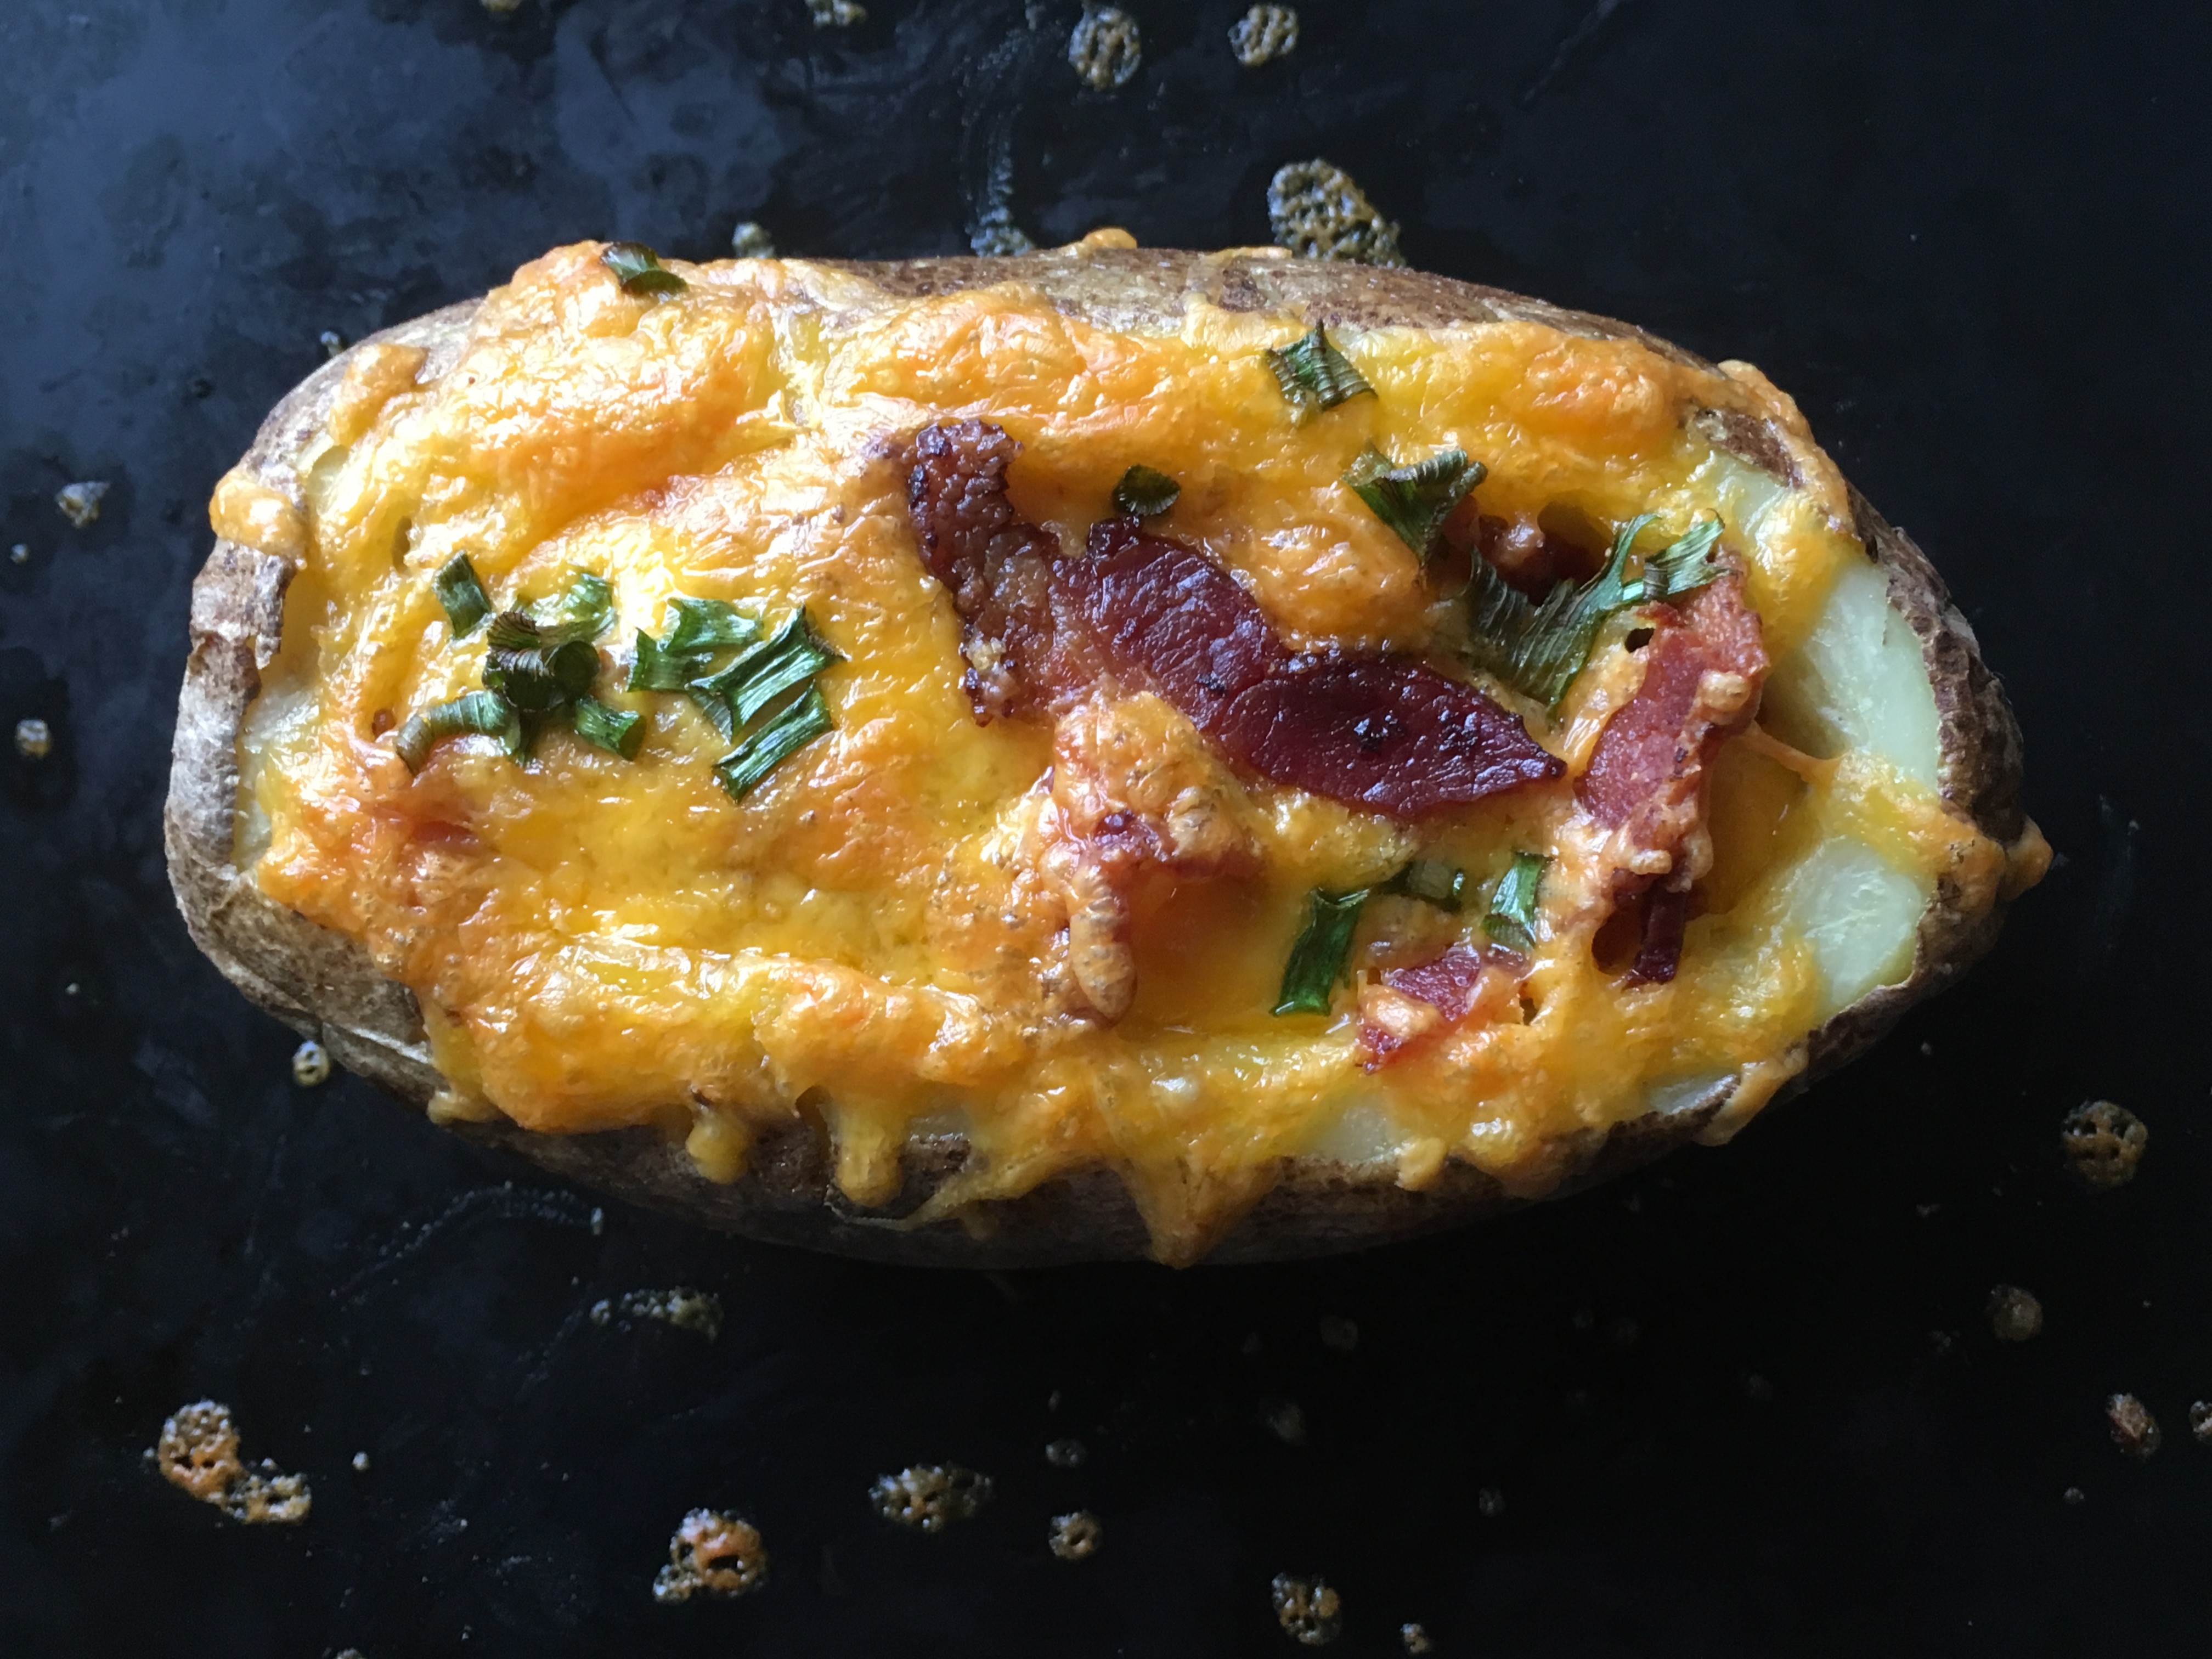 Stuff a  russet potato with egg, bacon, Cheddar cheese, and chives and bake in the oven. "The perfect Idaho sunrise breakfast!" says dobermanmom.
                          